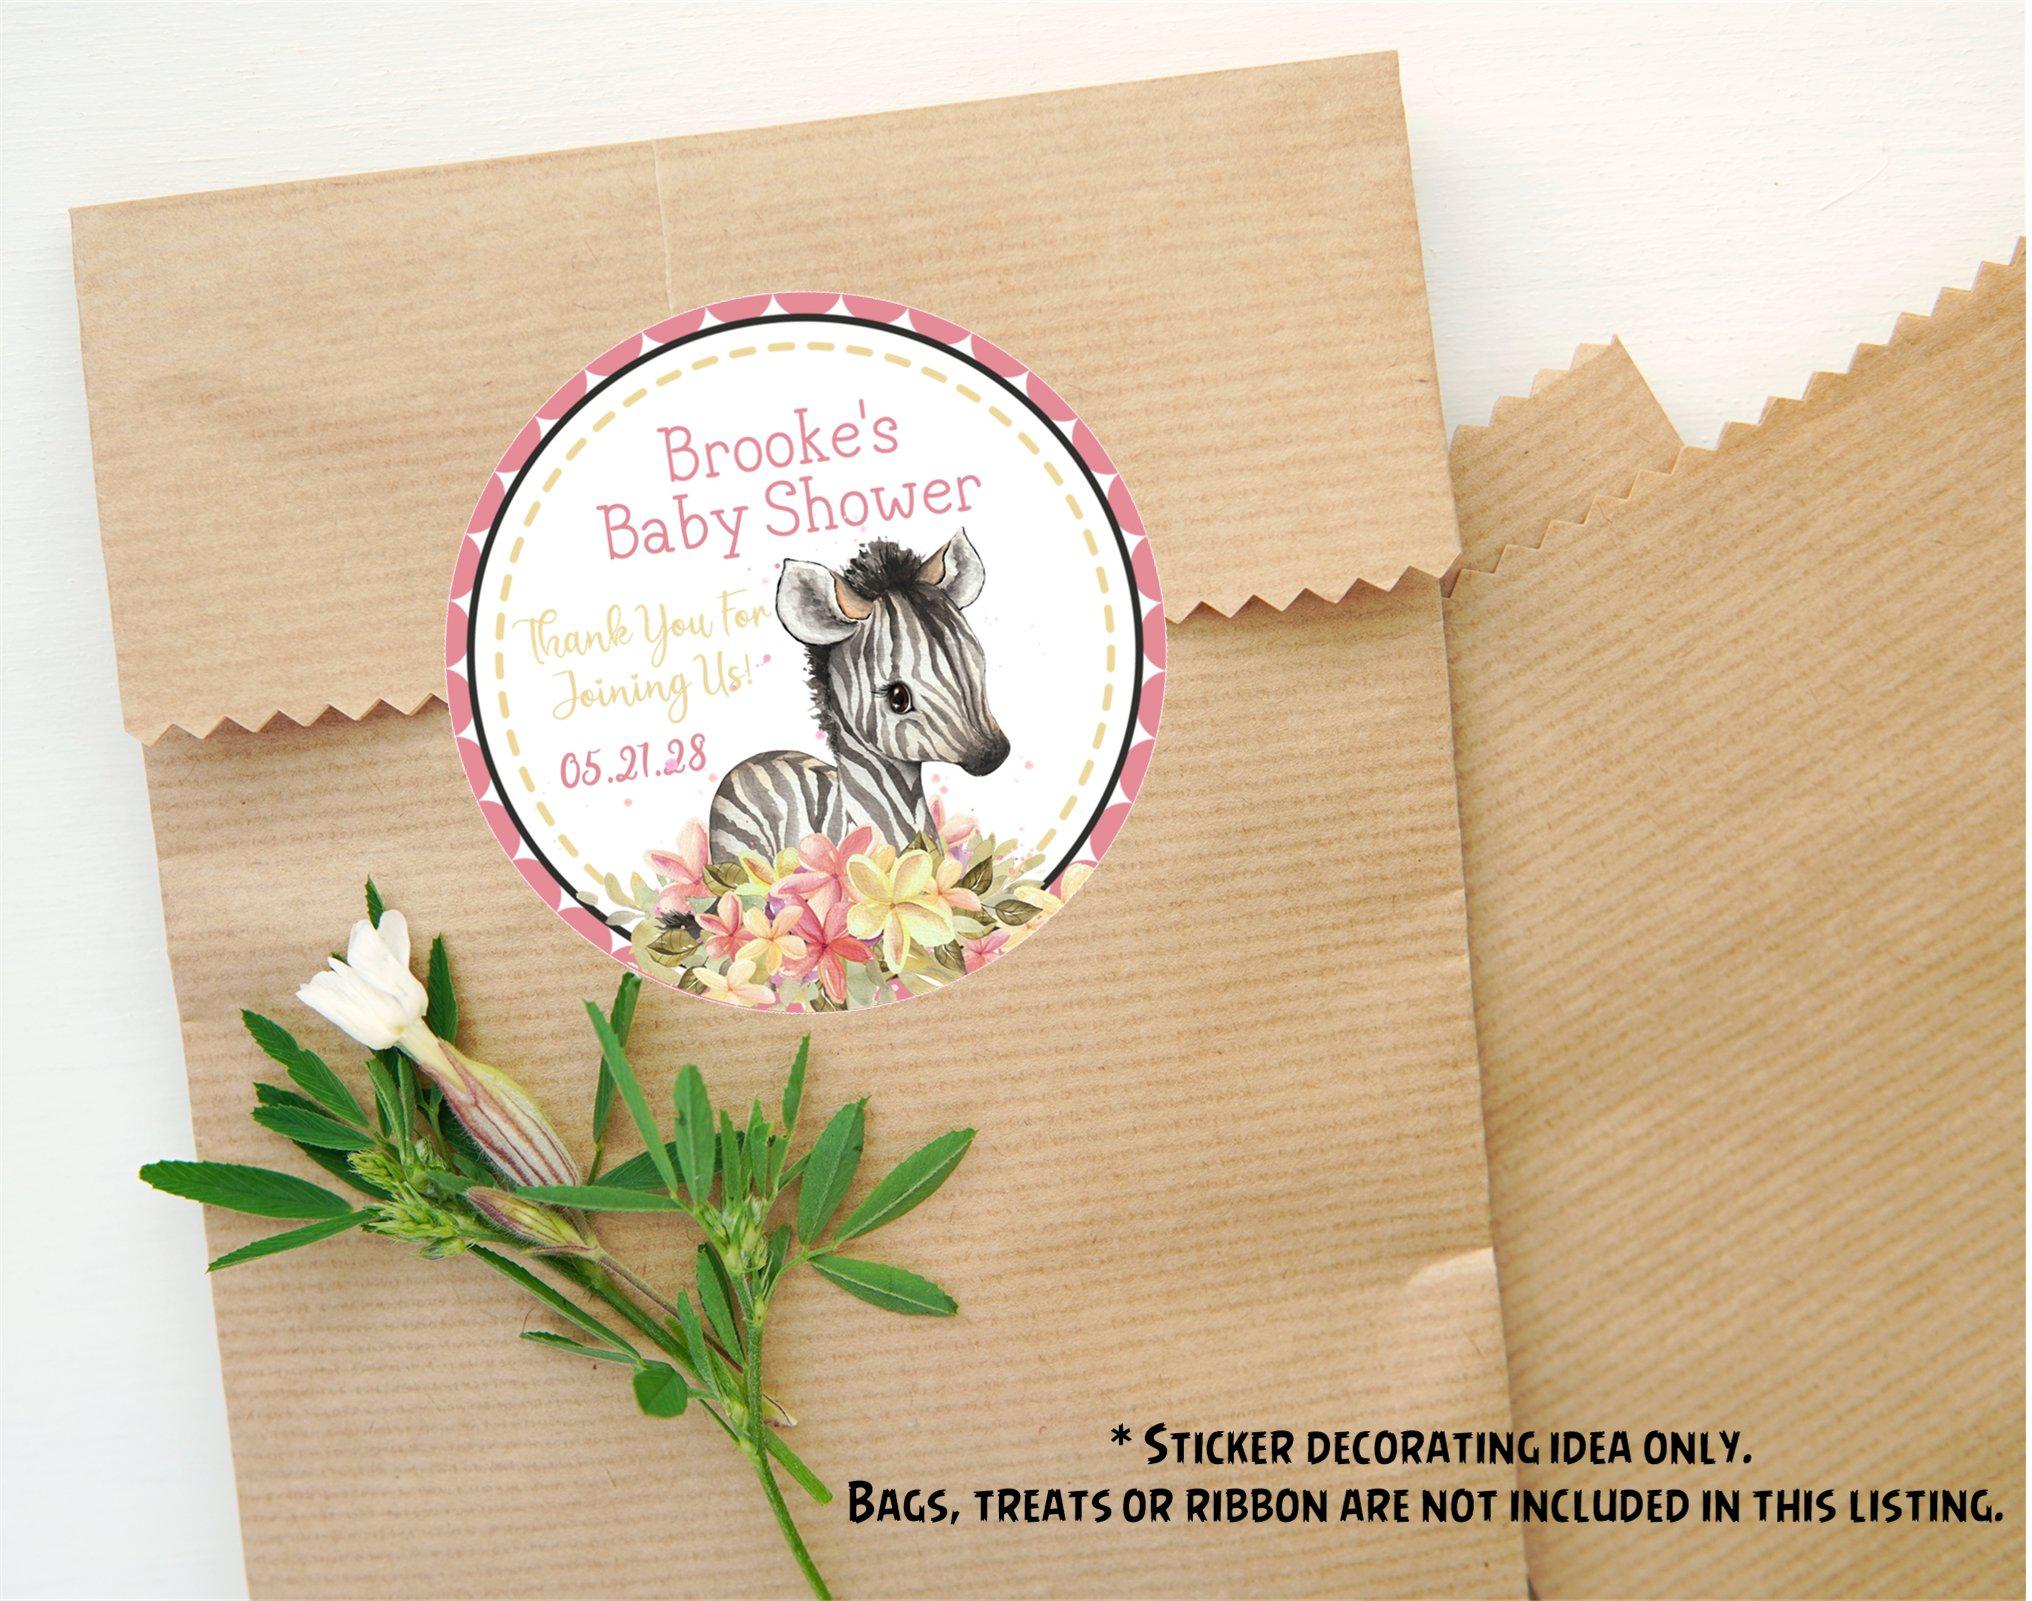 Girls Zebra Baby Shower Stickers Or Favor Tags